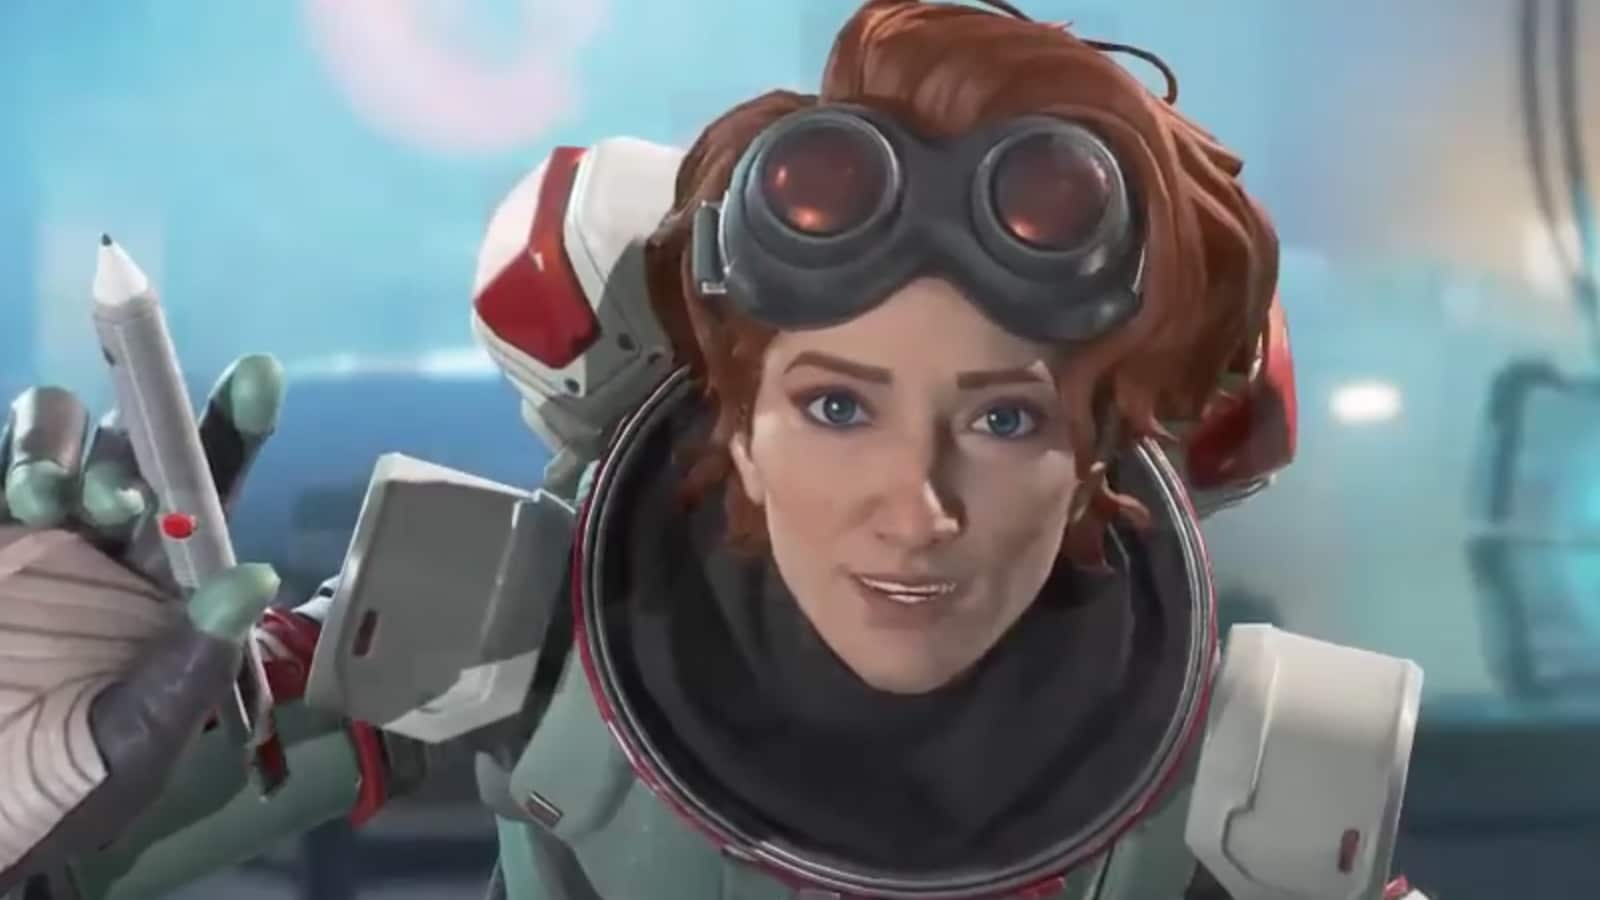 Apex Legends pays tribute to voice actor's pet with new Horizon skin